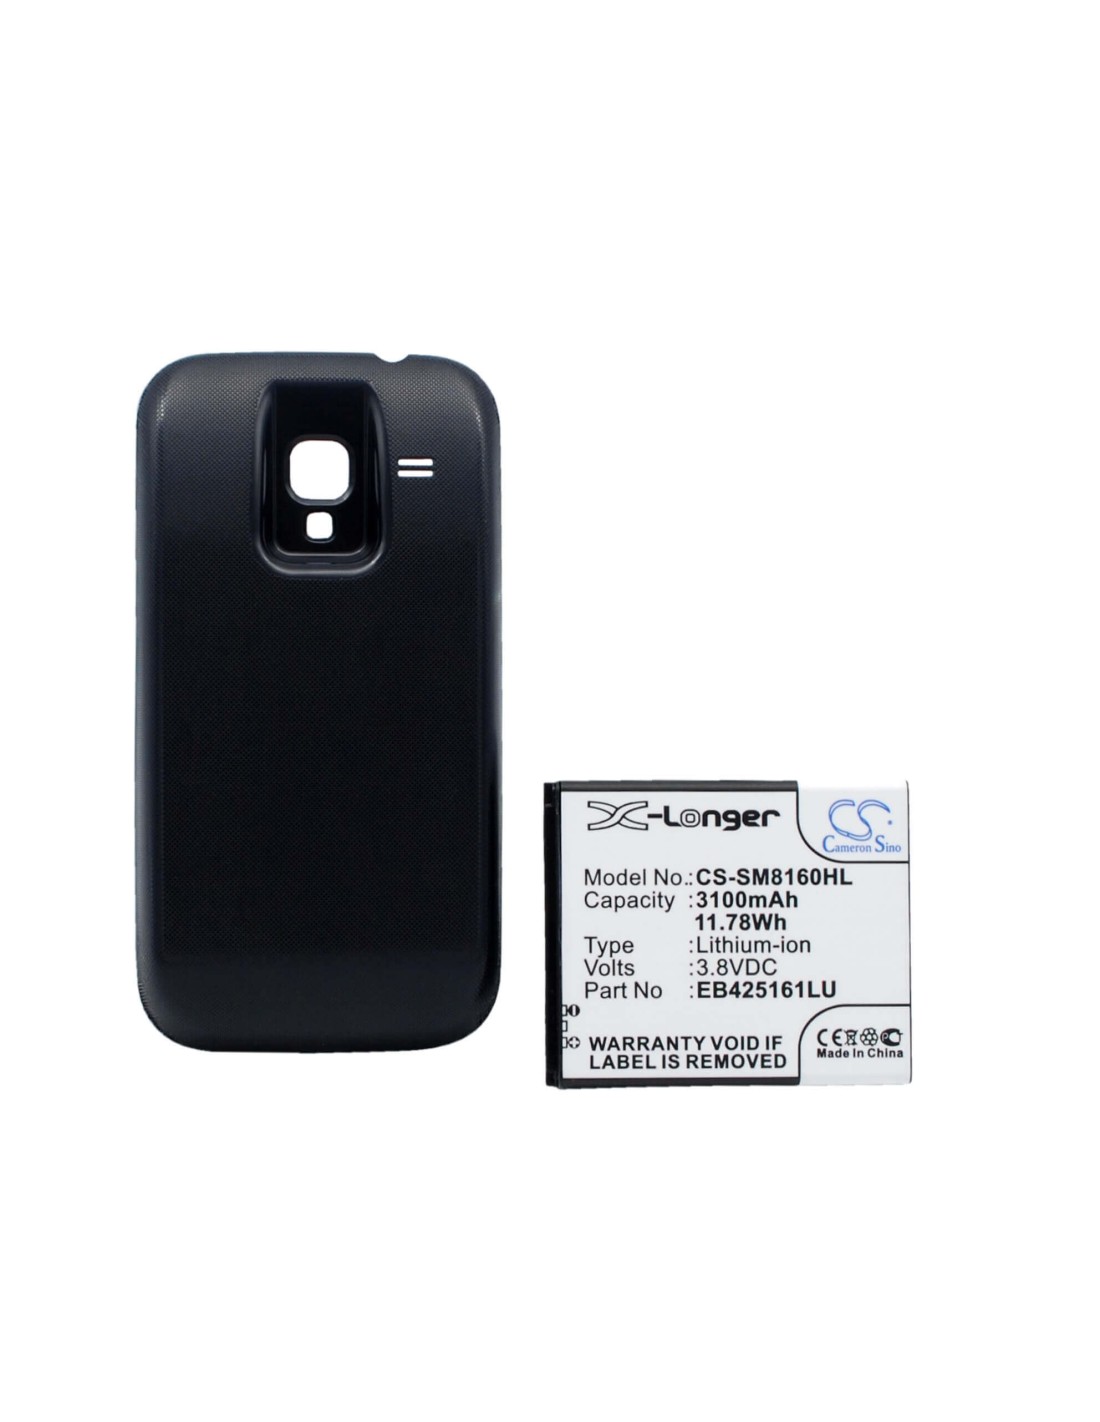 Battery for Samsung Galaxy Ace 2, GT-I8160, GT-I8160P, with blue back cover 3.8V, 3500mAh - 13.30Wh